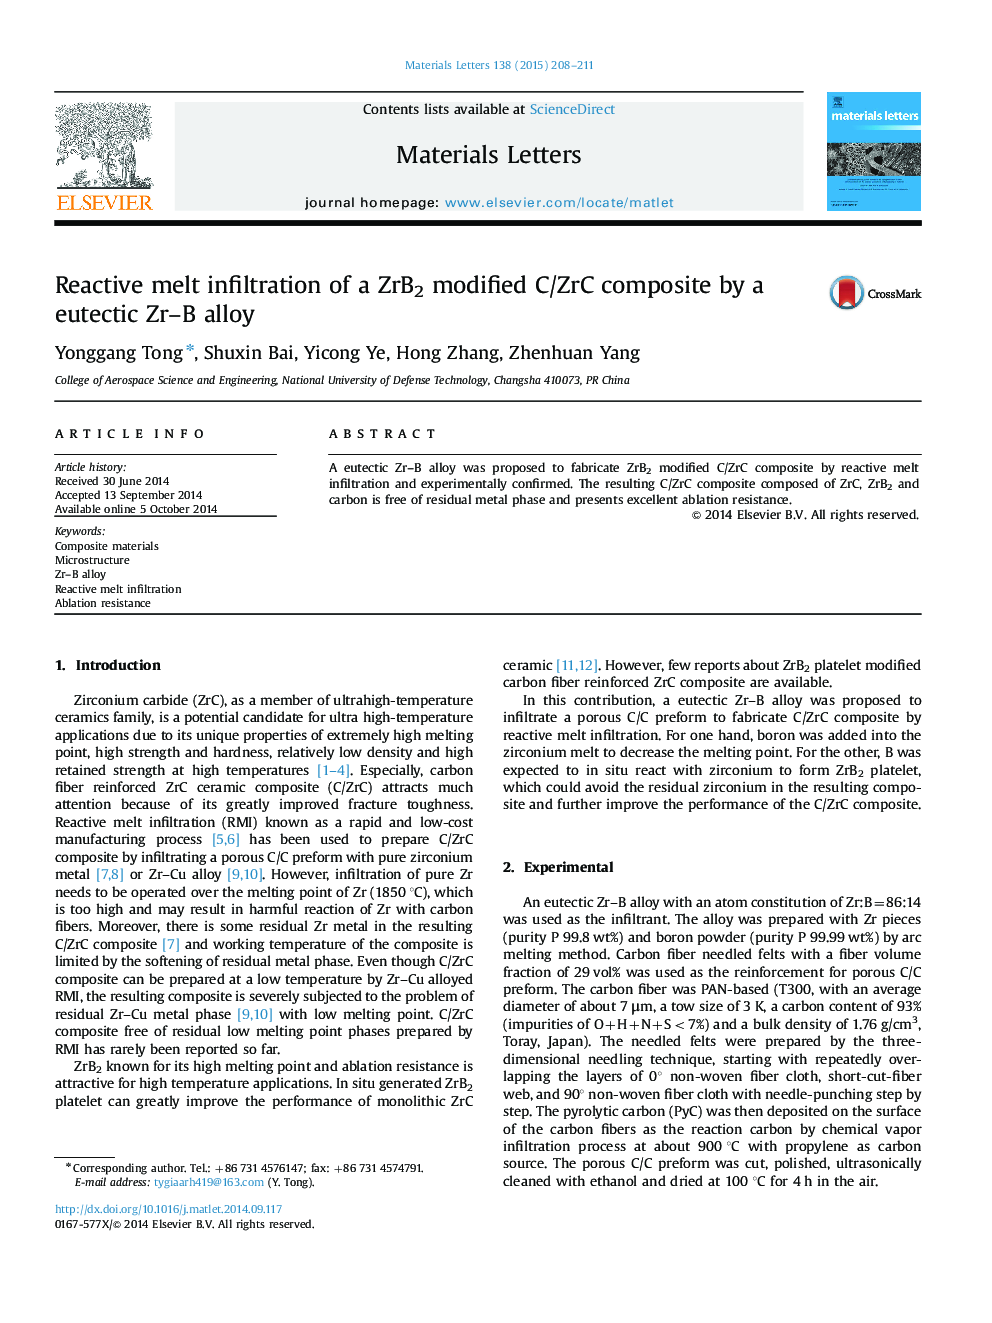 Reactive melt infiltration of a ZrB2 modified C/ZrC composite by a eutectic Zr-B alloy